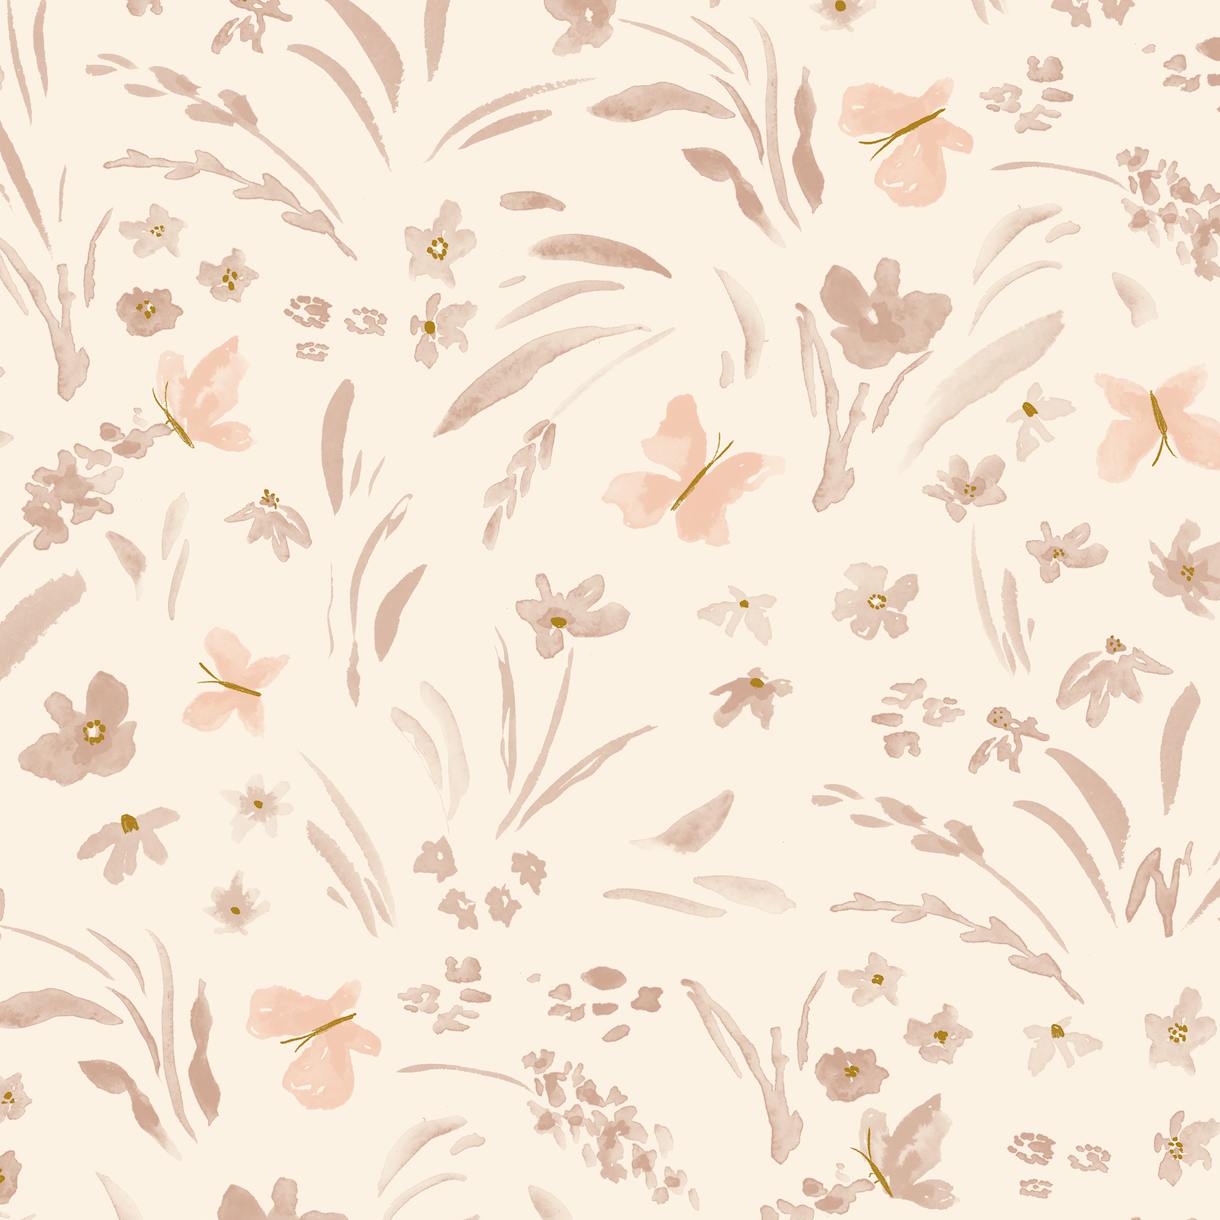 Butterfly Meadowland Wallpaper Repeat Pattern Dune - Munks and Me Wallpaper